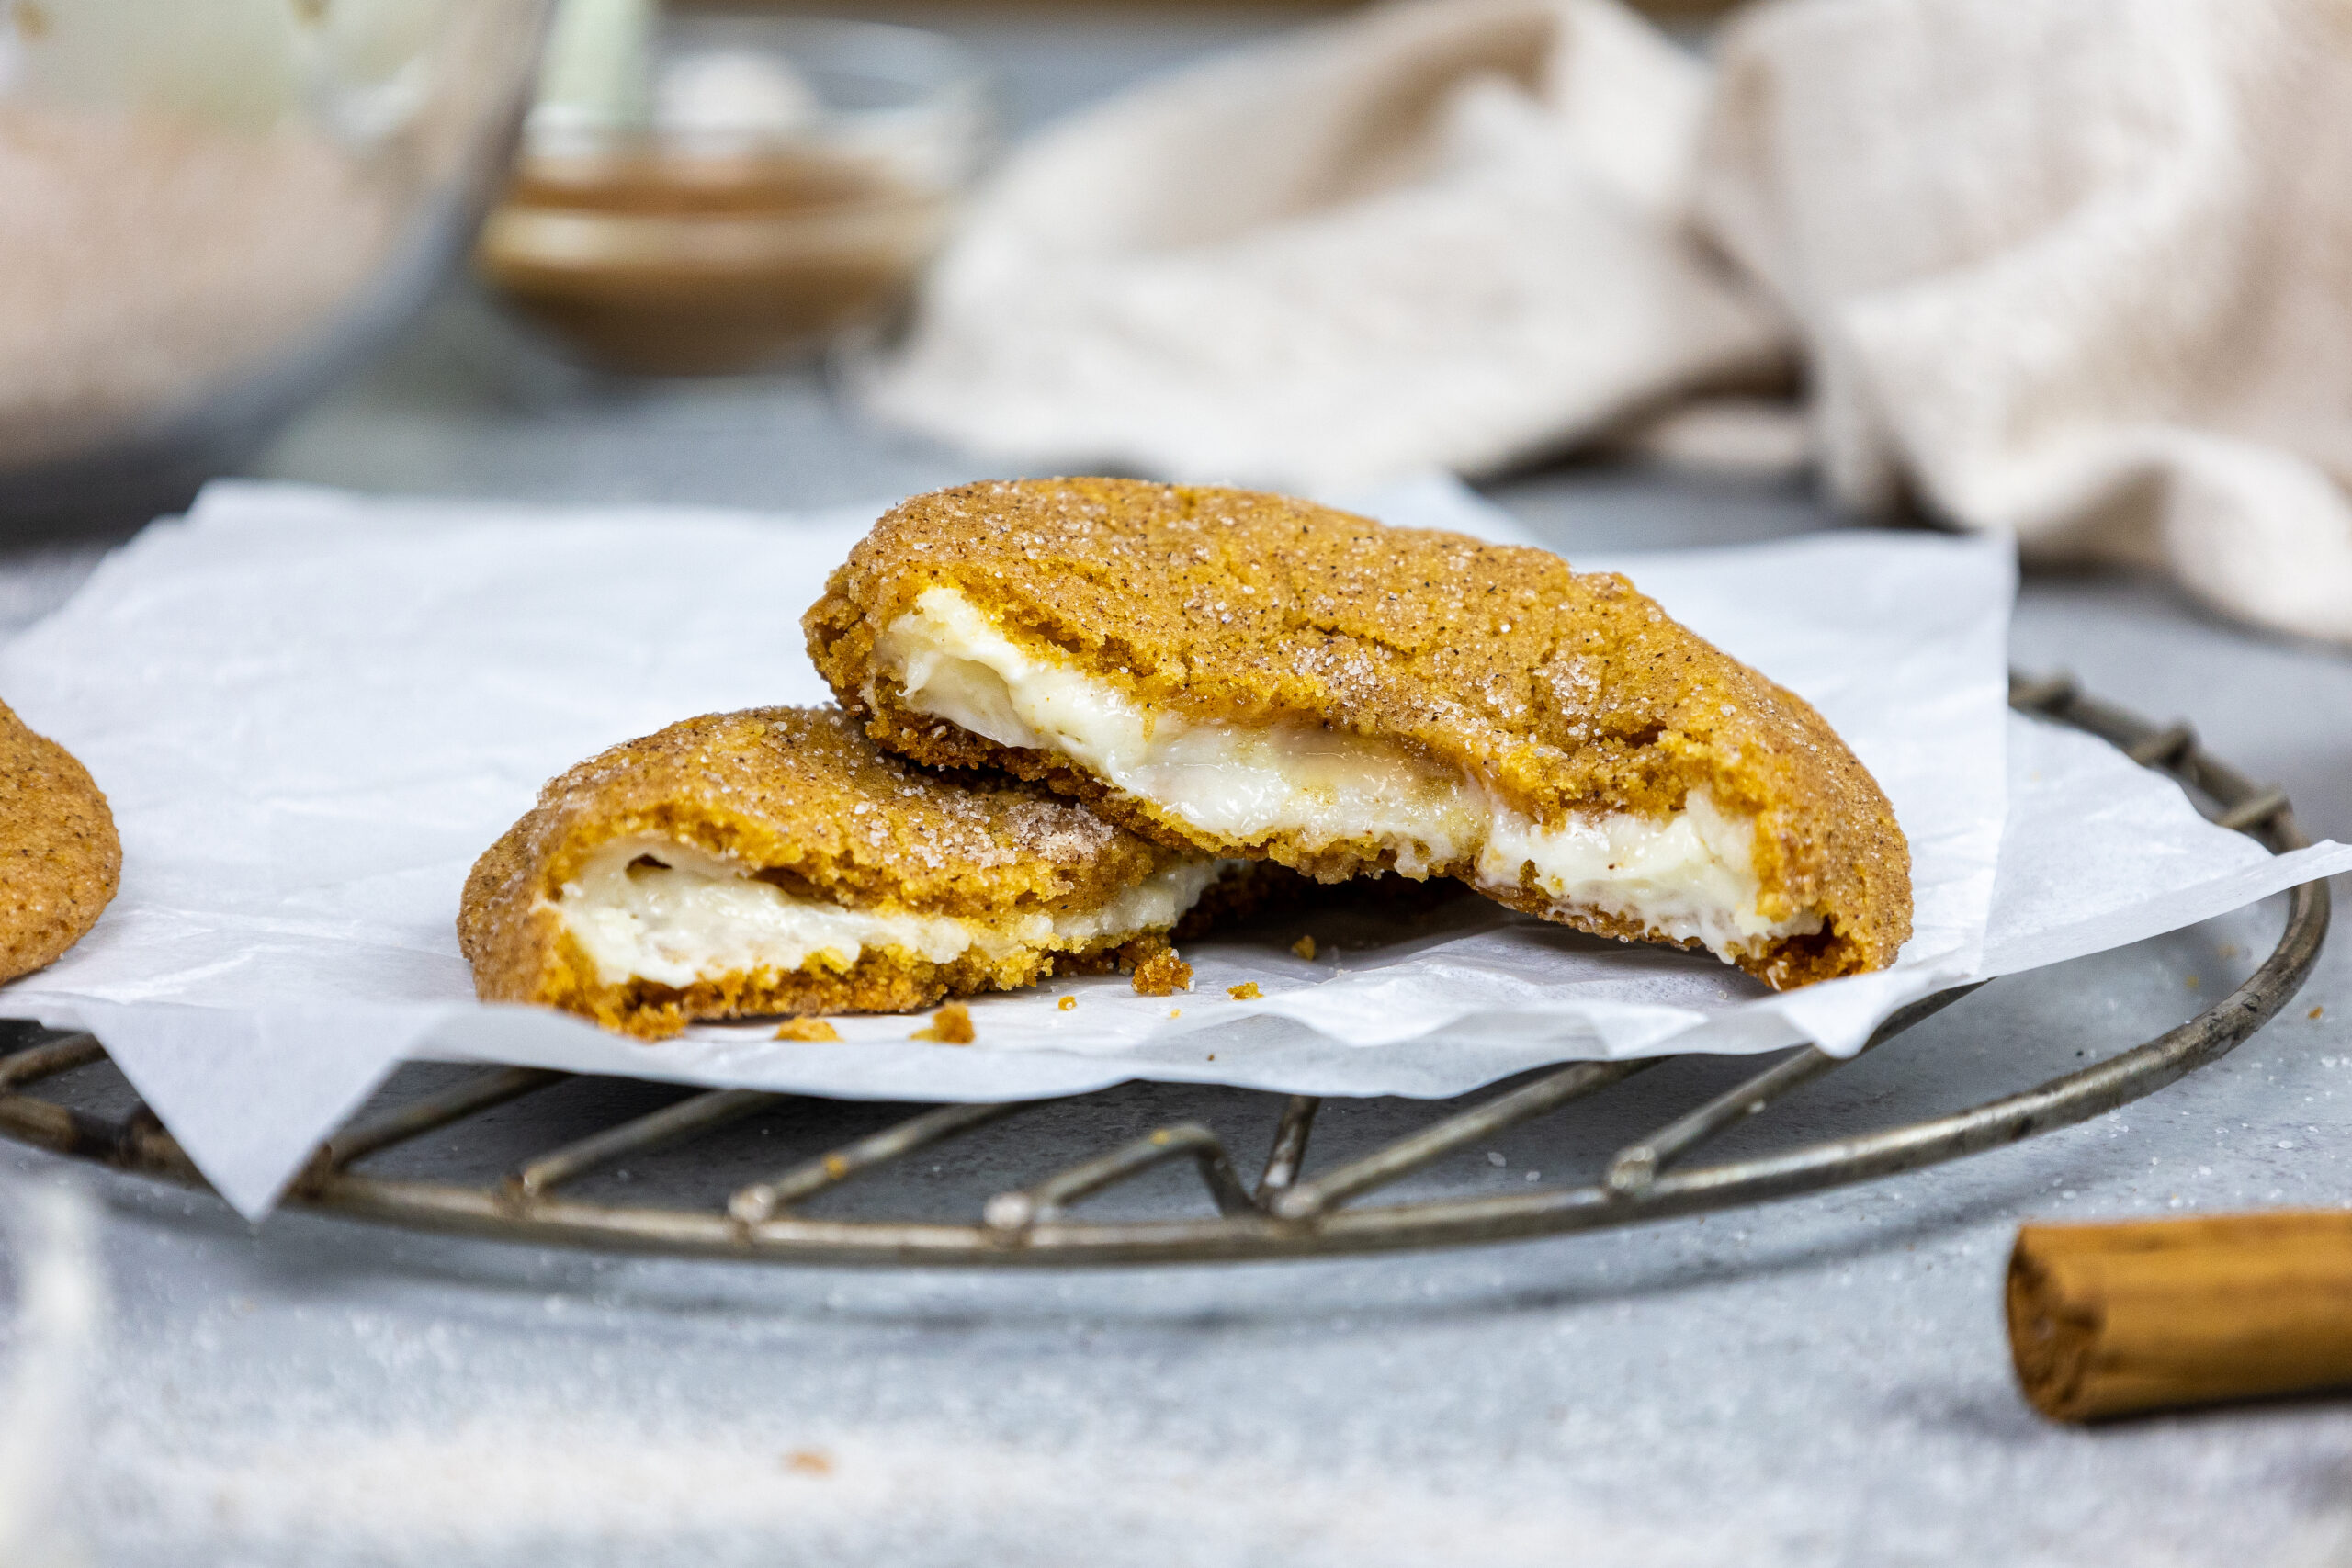 https://chelsweets.com/wp-content/uploads/2021/09/pumpkin-cheesecake-cookie-thats-been-broken-in-half-to-show-its-filling-scaled.jpg